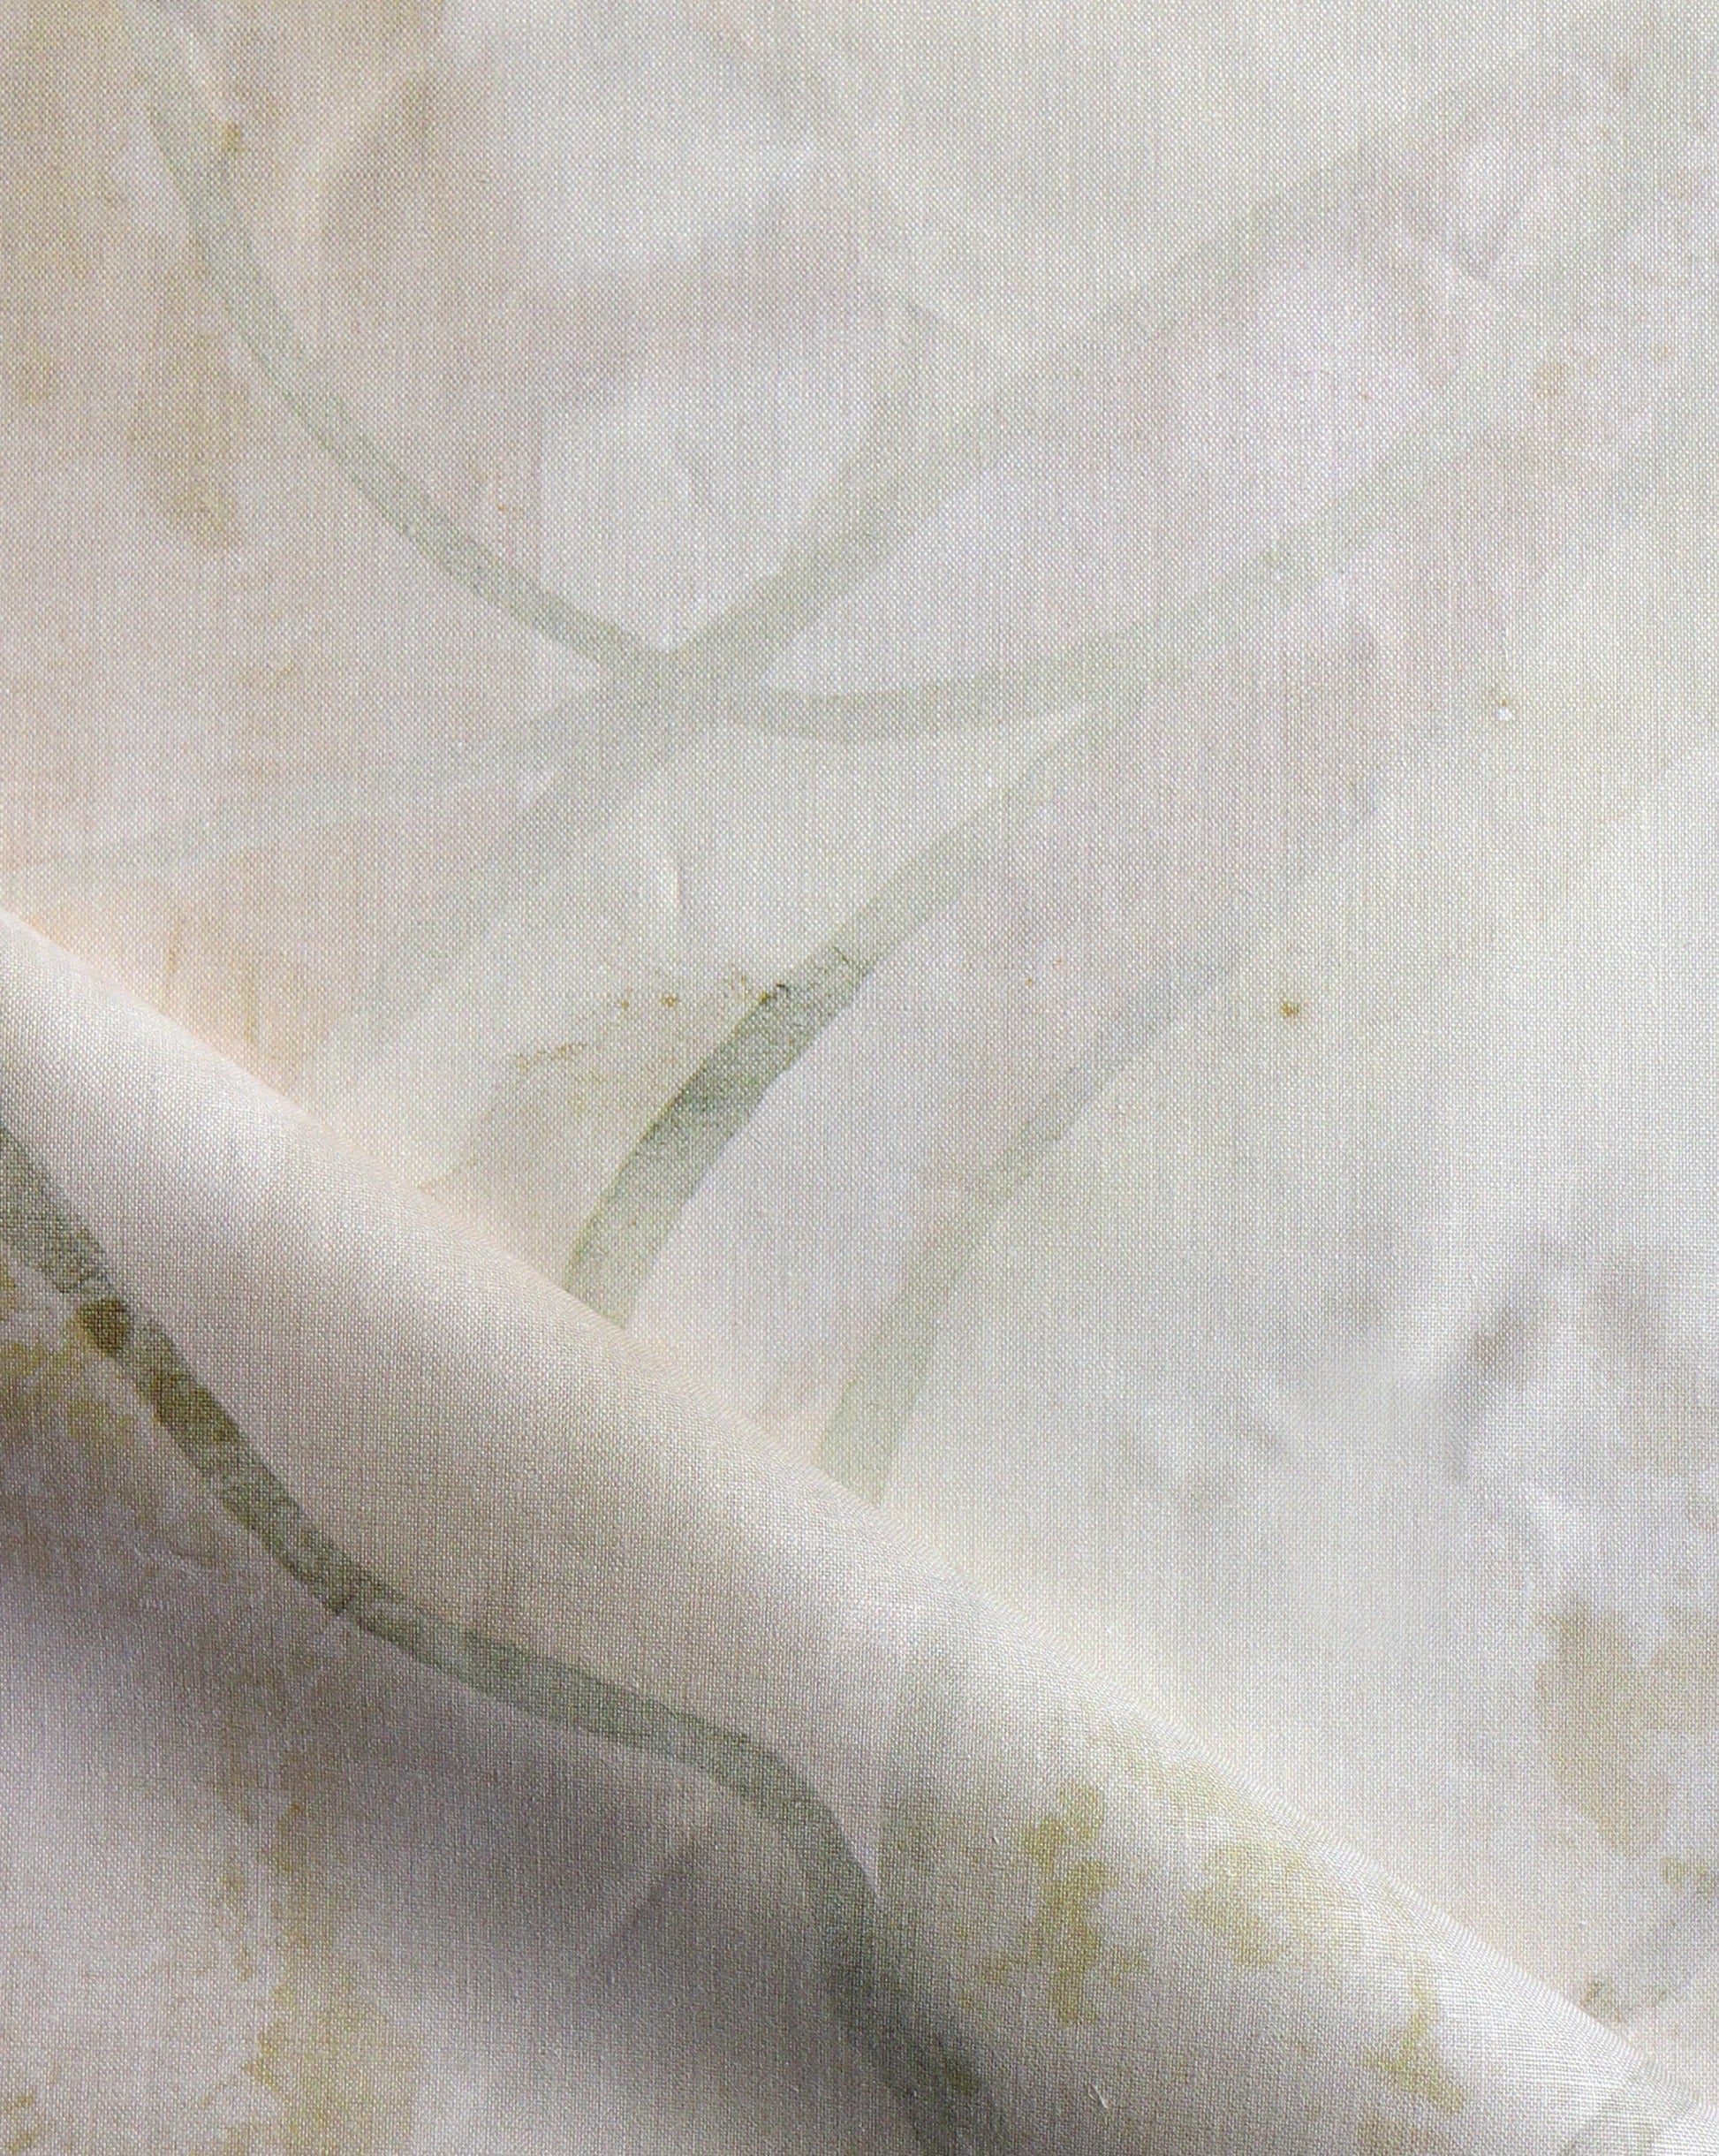 Eskayel Hibiscus Lily in Pearl is a pattern for fabric and wallpaper using yellow tones.